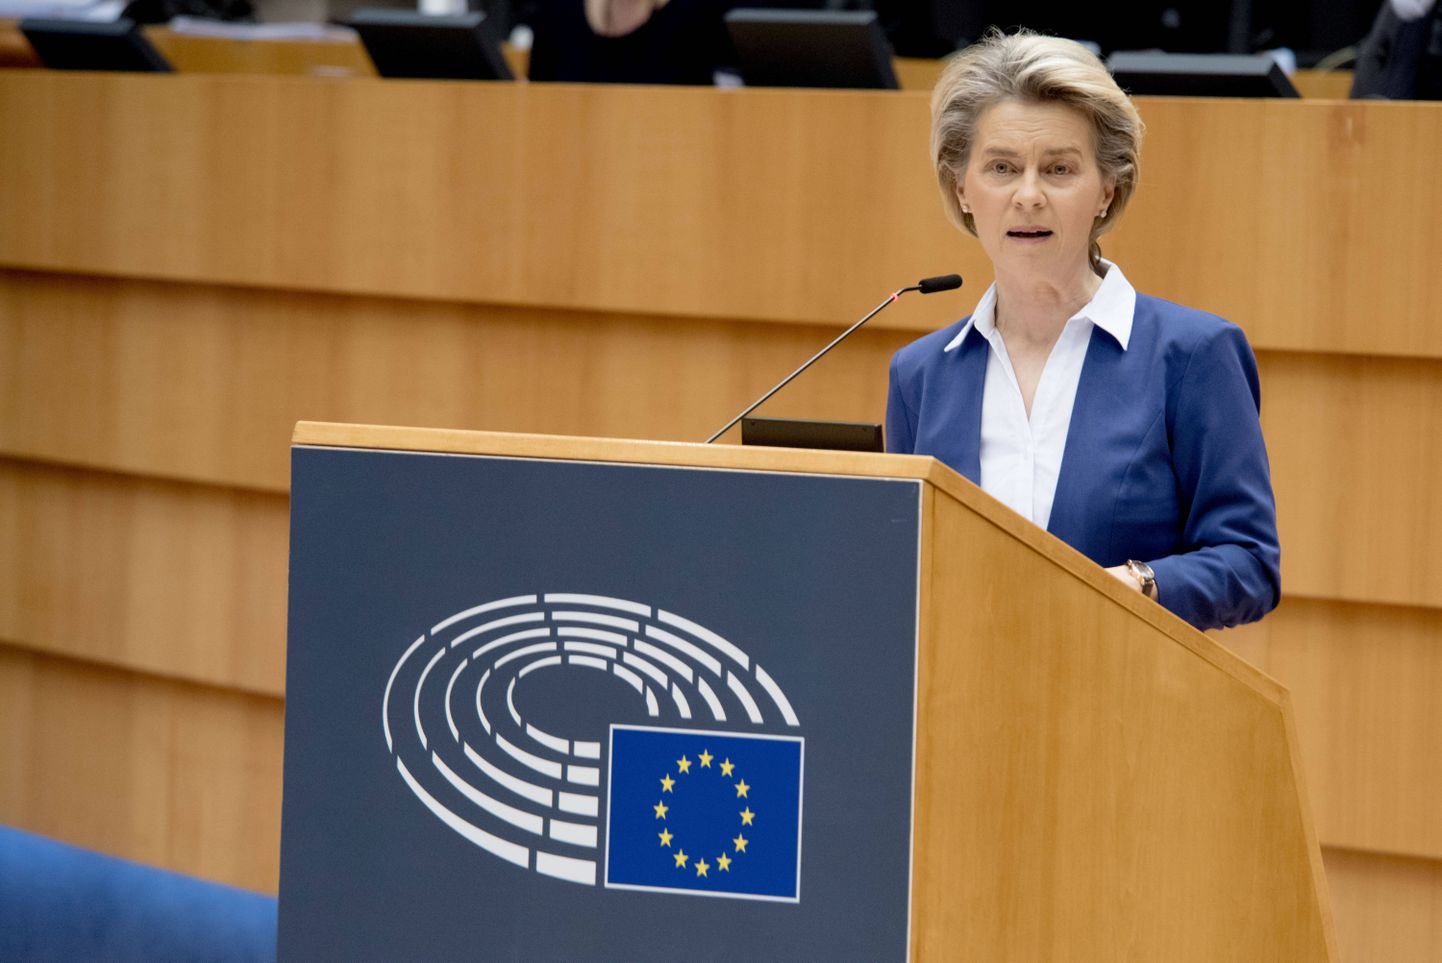 210120 -- BRUSSELS, Jan. 20, 2021 -- European Commission President Ursula von der Leyen delivers a speech during a plenary session of the European Parliament in Brussels, Belgium, on Jan. 20, 2021. Top officials of the EU rejoiced on Wednesday over the inauguration of the new administration of the United States, expressing their readiness to mend the broken partnership and laying out expectations for renewed transatlantic cooperation. /Handout via Xinhua BELGIUM-BRUSSELS-EU-U.S.-RELATIONSHIP-SPEECH EuropeanxUnion PUBLICATIONxNOTxINxCHN